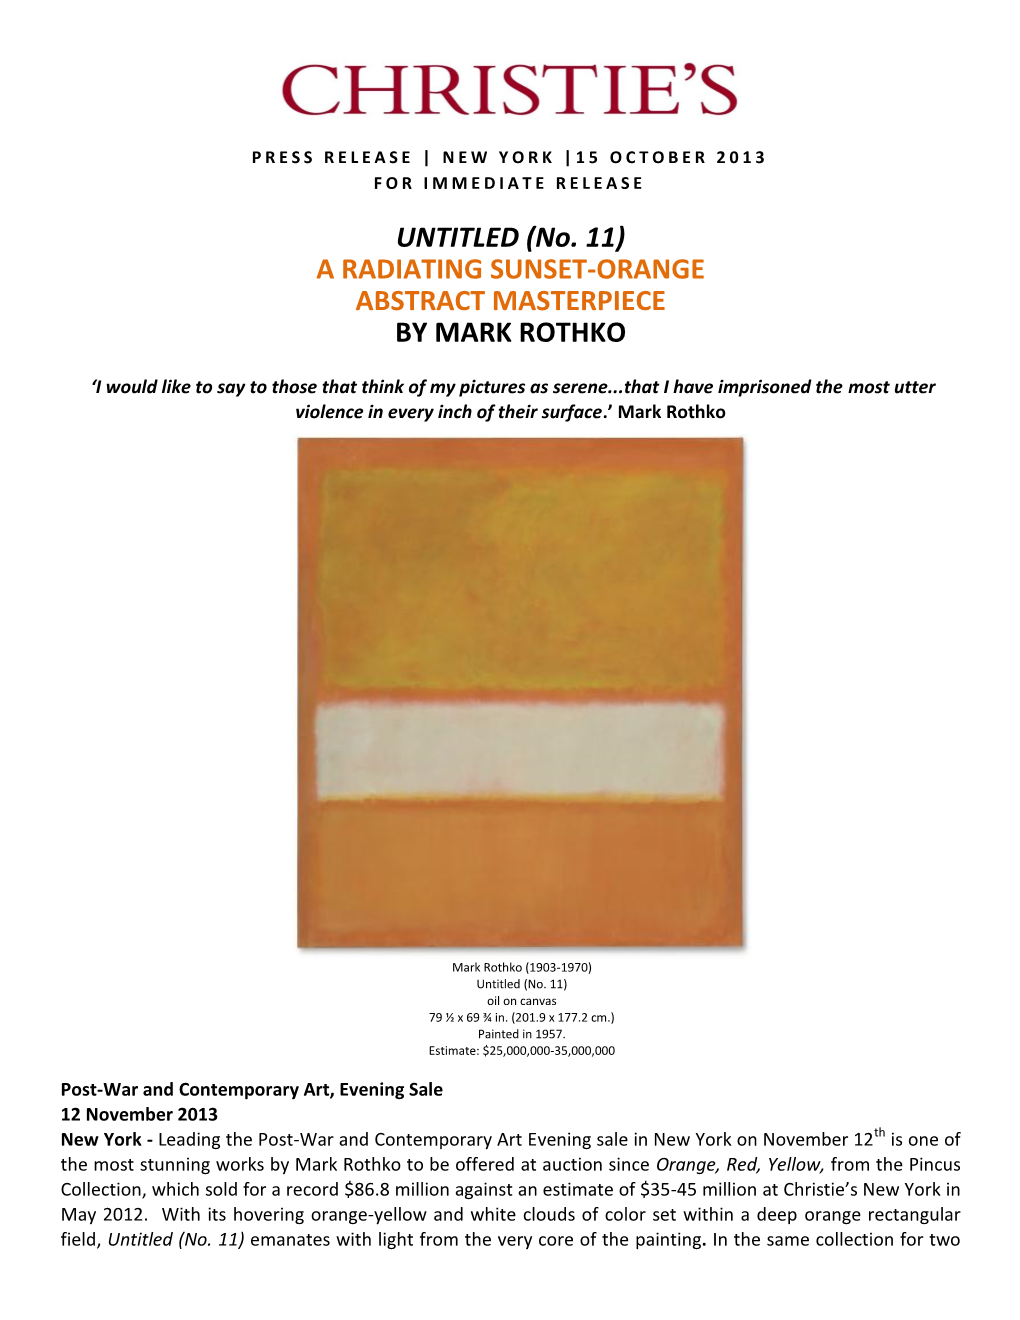 UNTITLED (No. 11) a RADIATING SUNSET-ORANGE ABSTRACT MASTERPIECE by MARK ROTHKO